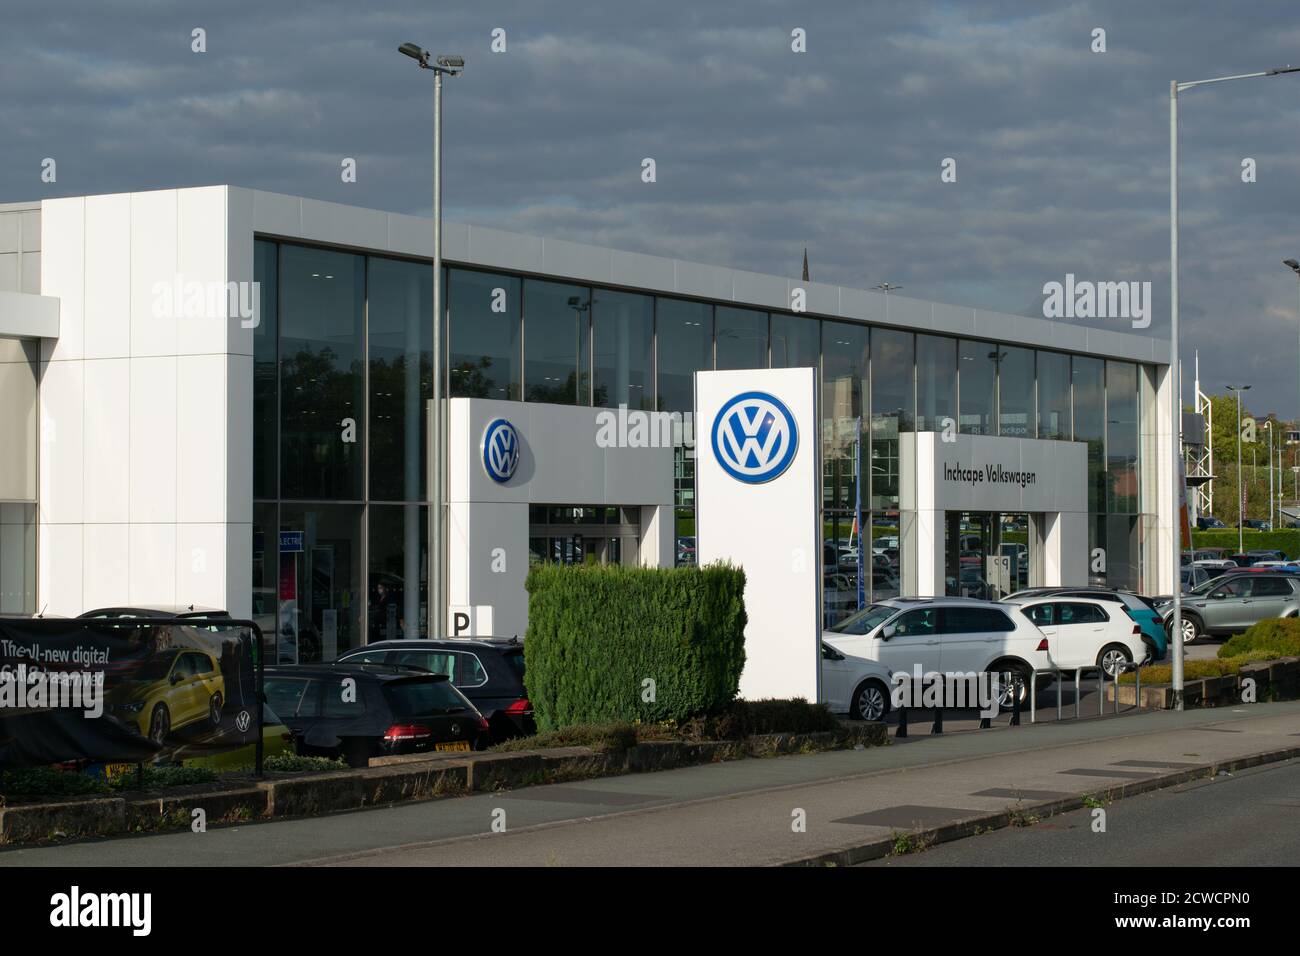 Volkswagen Inchcape car dealership, Stockport, UK with cars parked on forecourt. Stock Photo